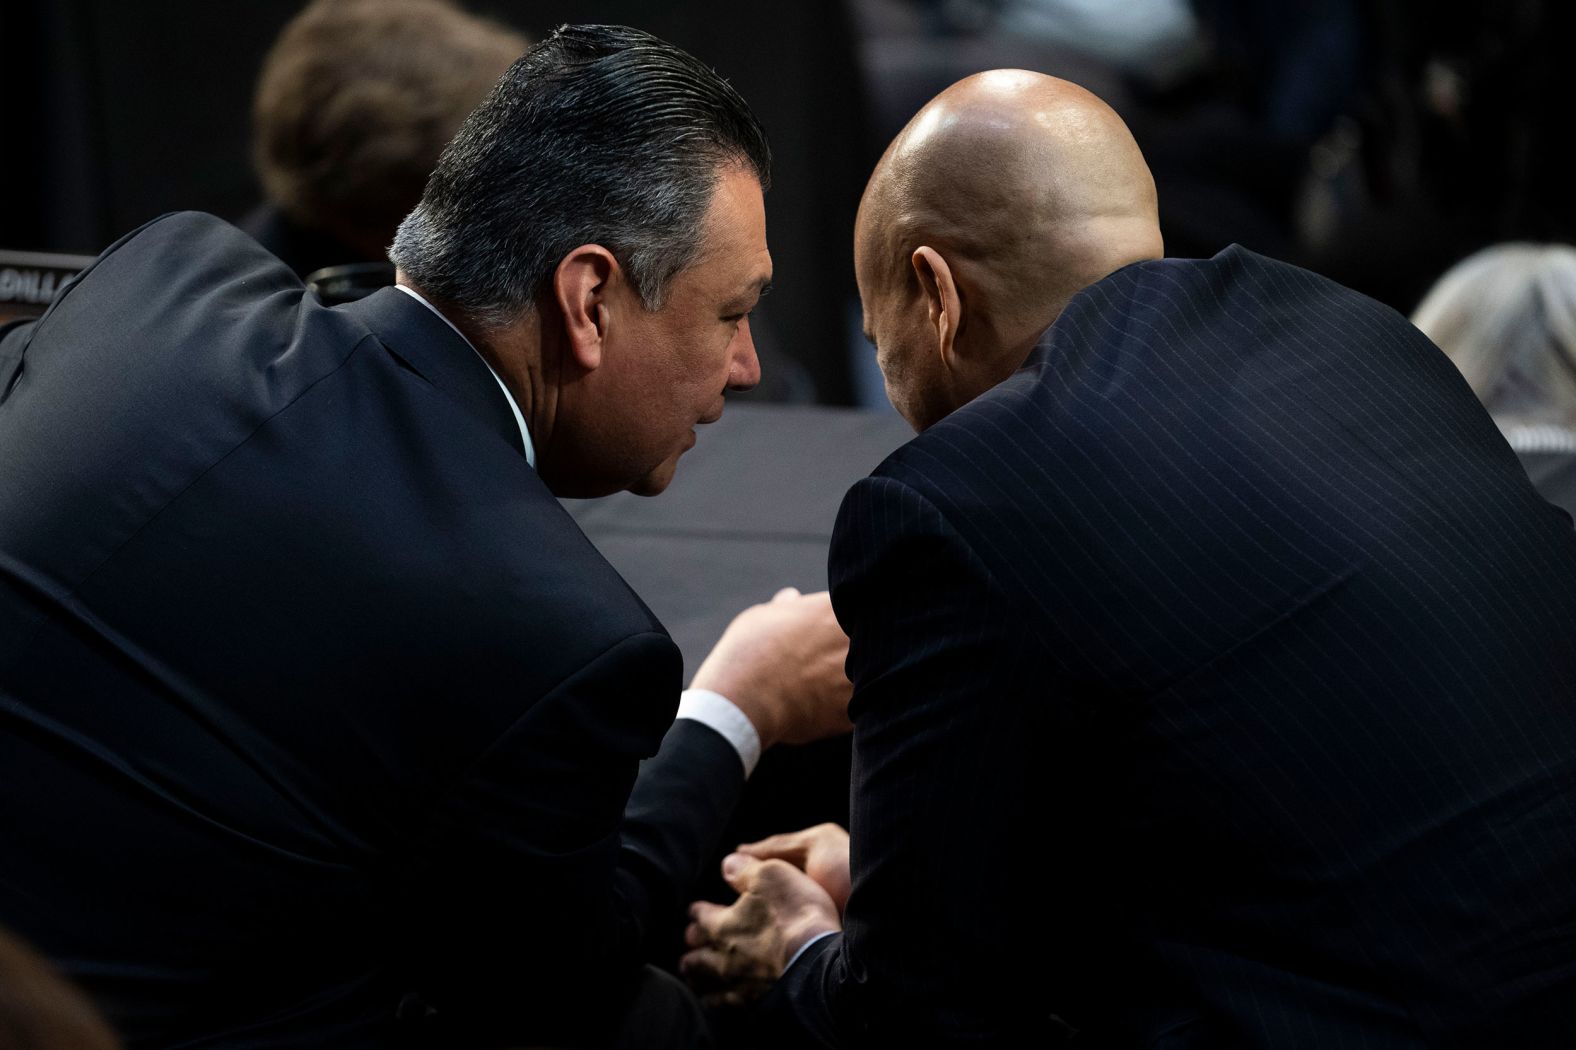 Democratic US Sens. Alex Padilla, left, and Cory Booker speak during opening statements on March 21.